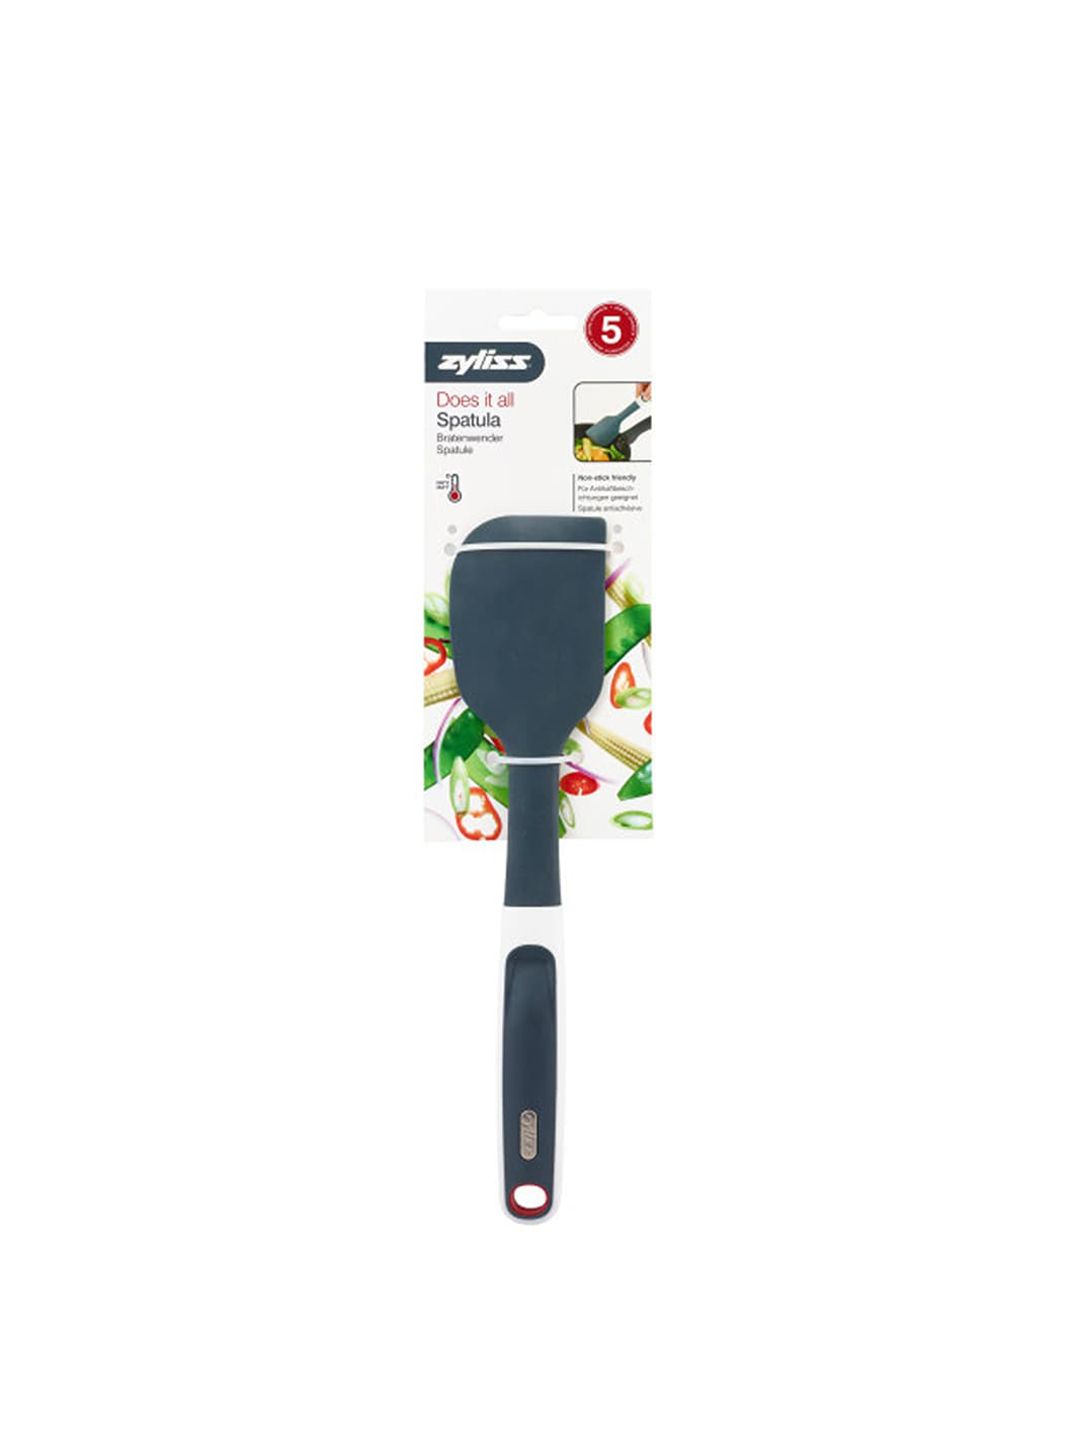 Zyliss Black & White Solid Dishwasher Safe Spatula Price in India